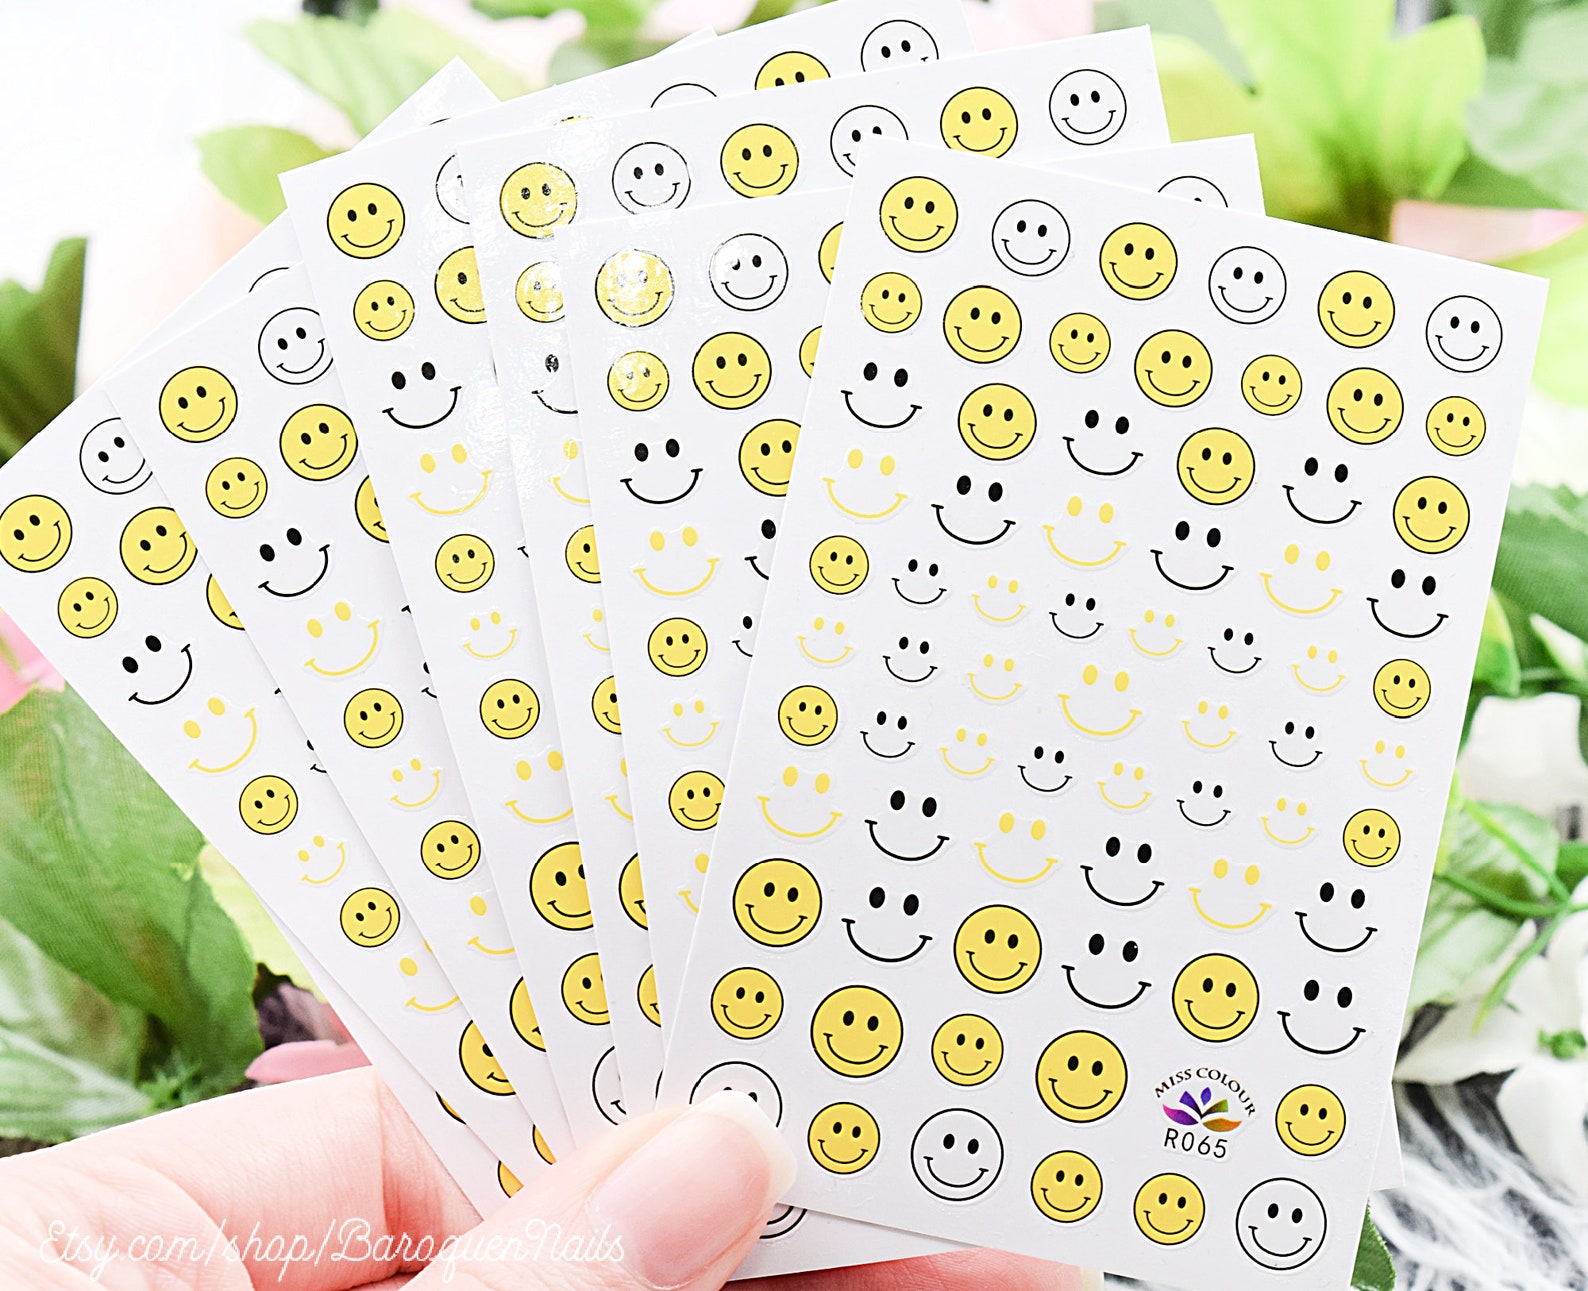 1. Smiley Face Nail Art Designs - wide 6